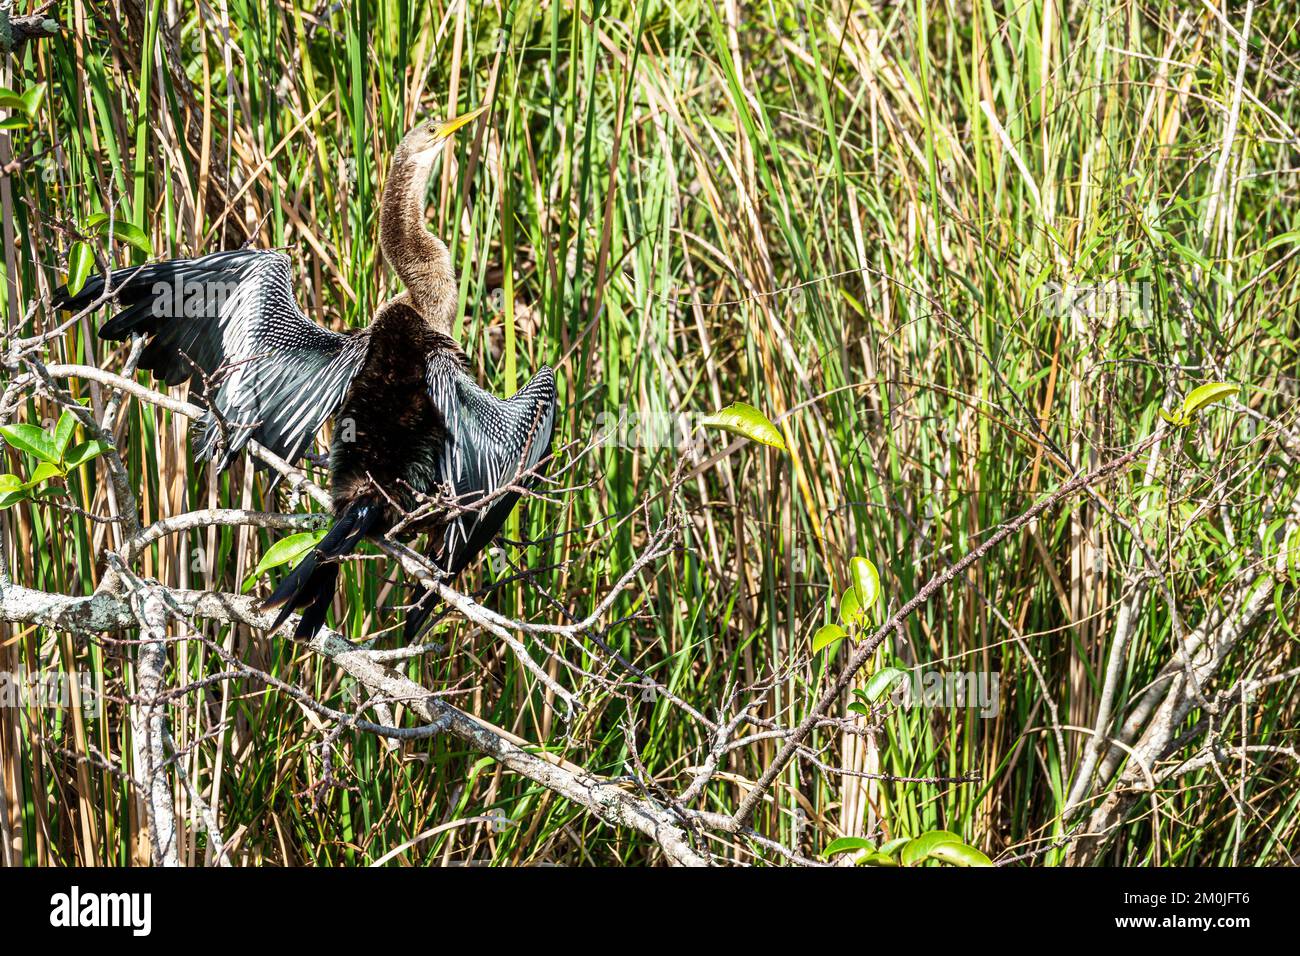 Everglades National Park Miami Florida,Tamiami Trail US Route 41 Shark Valley Visitors Center centre,anhinga leucogaster bird sitting spreading wings Stock Photo